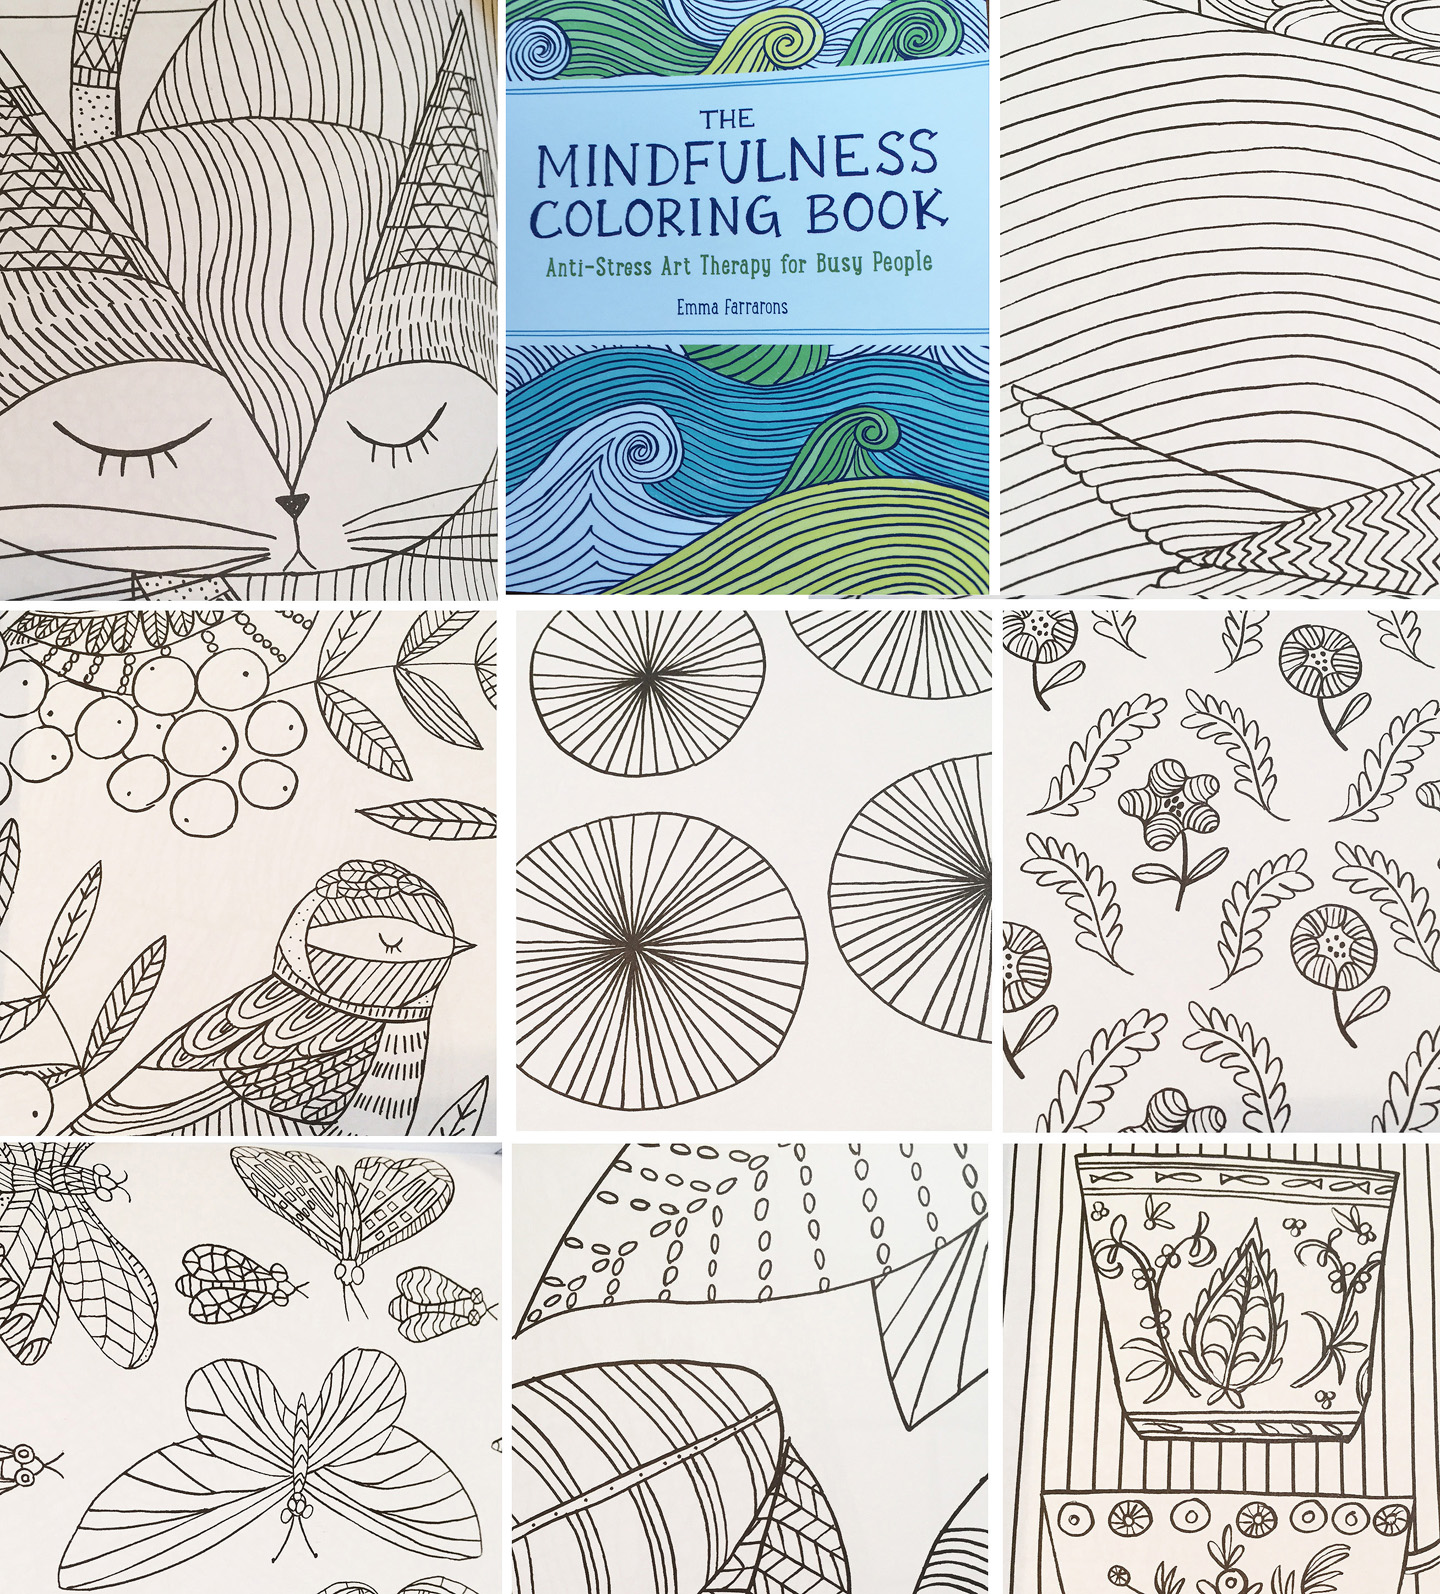 Coloring Book images